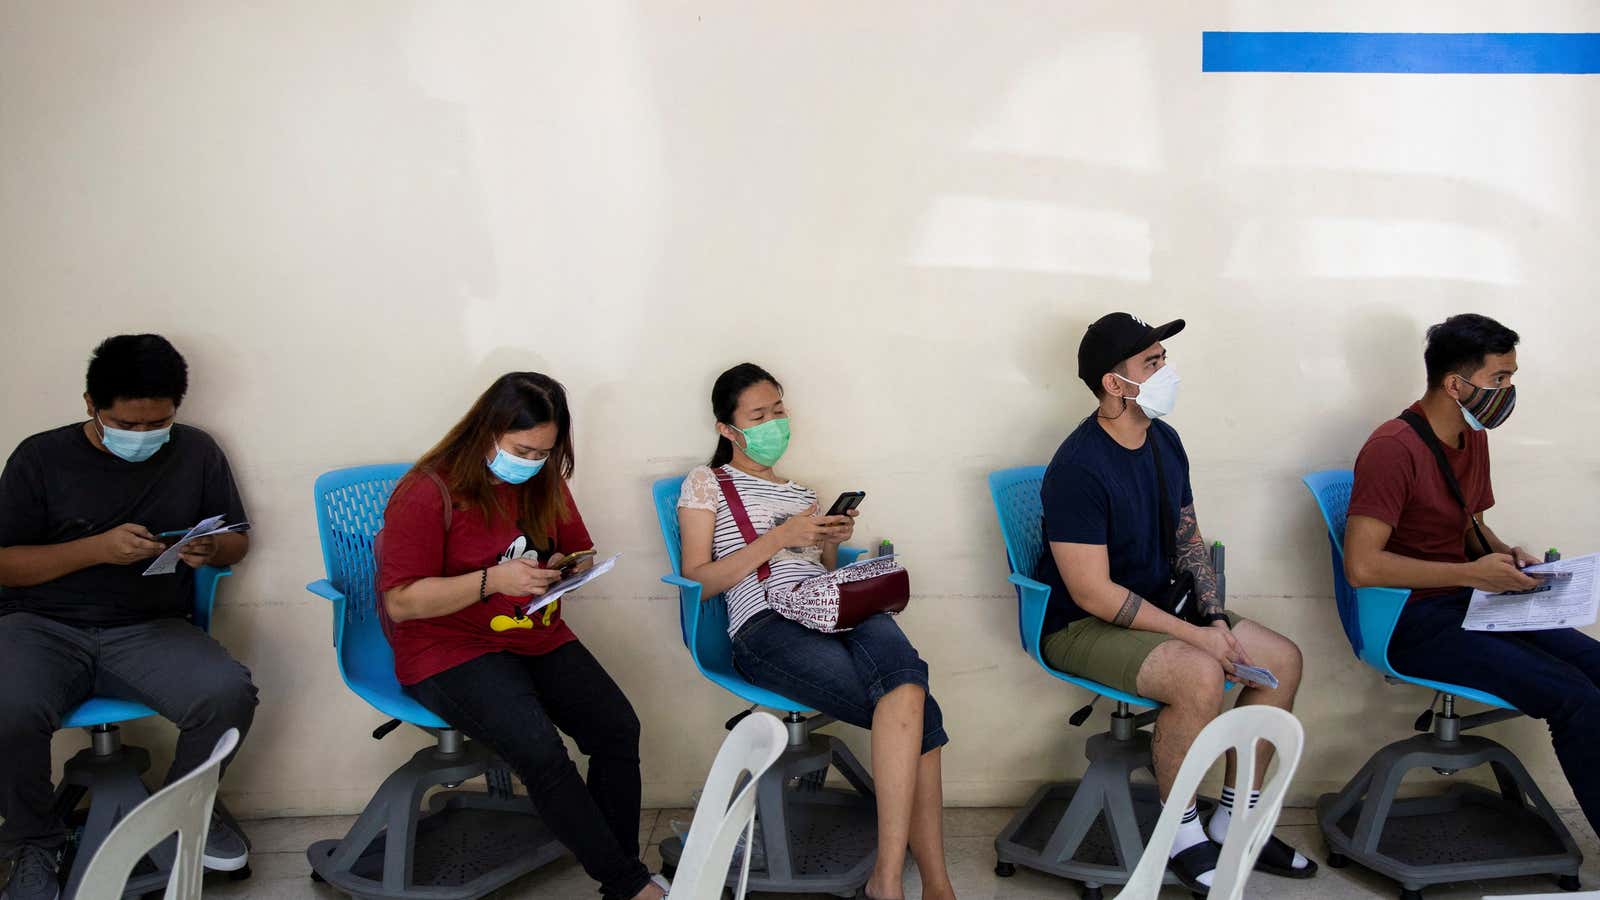 Filipinos waiting in line for a vaccine booster.